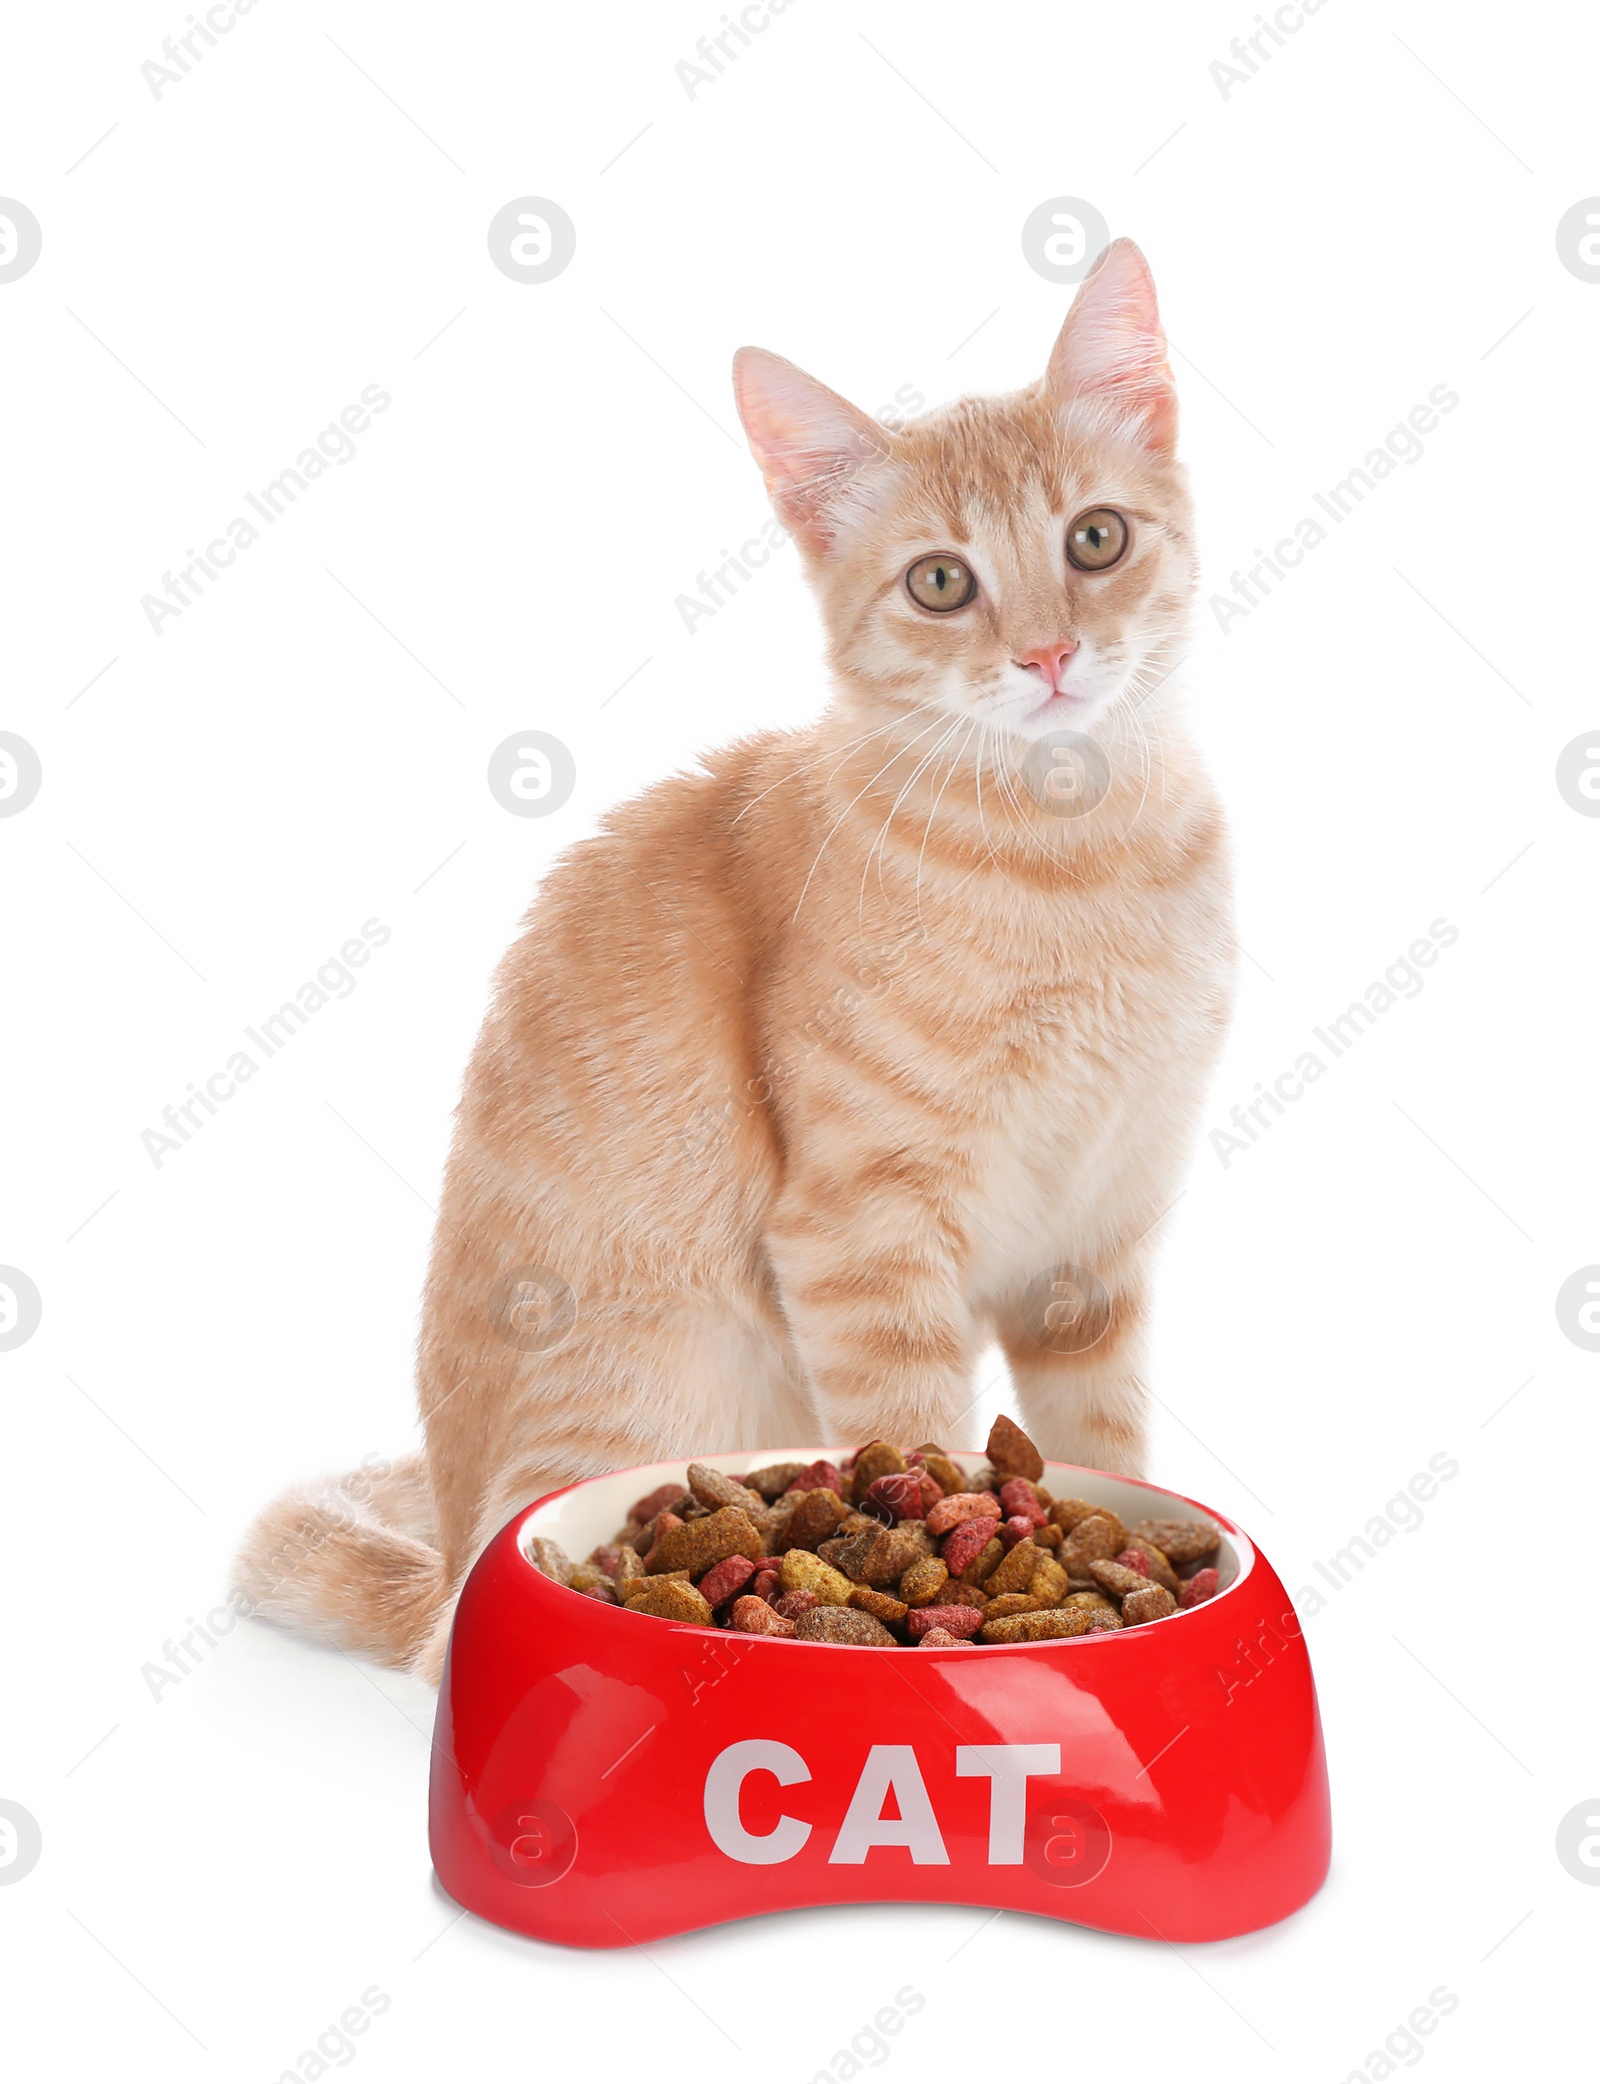 Image of Cute yellow cat and feeding bowl with dry food on white background. Lovely pet